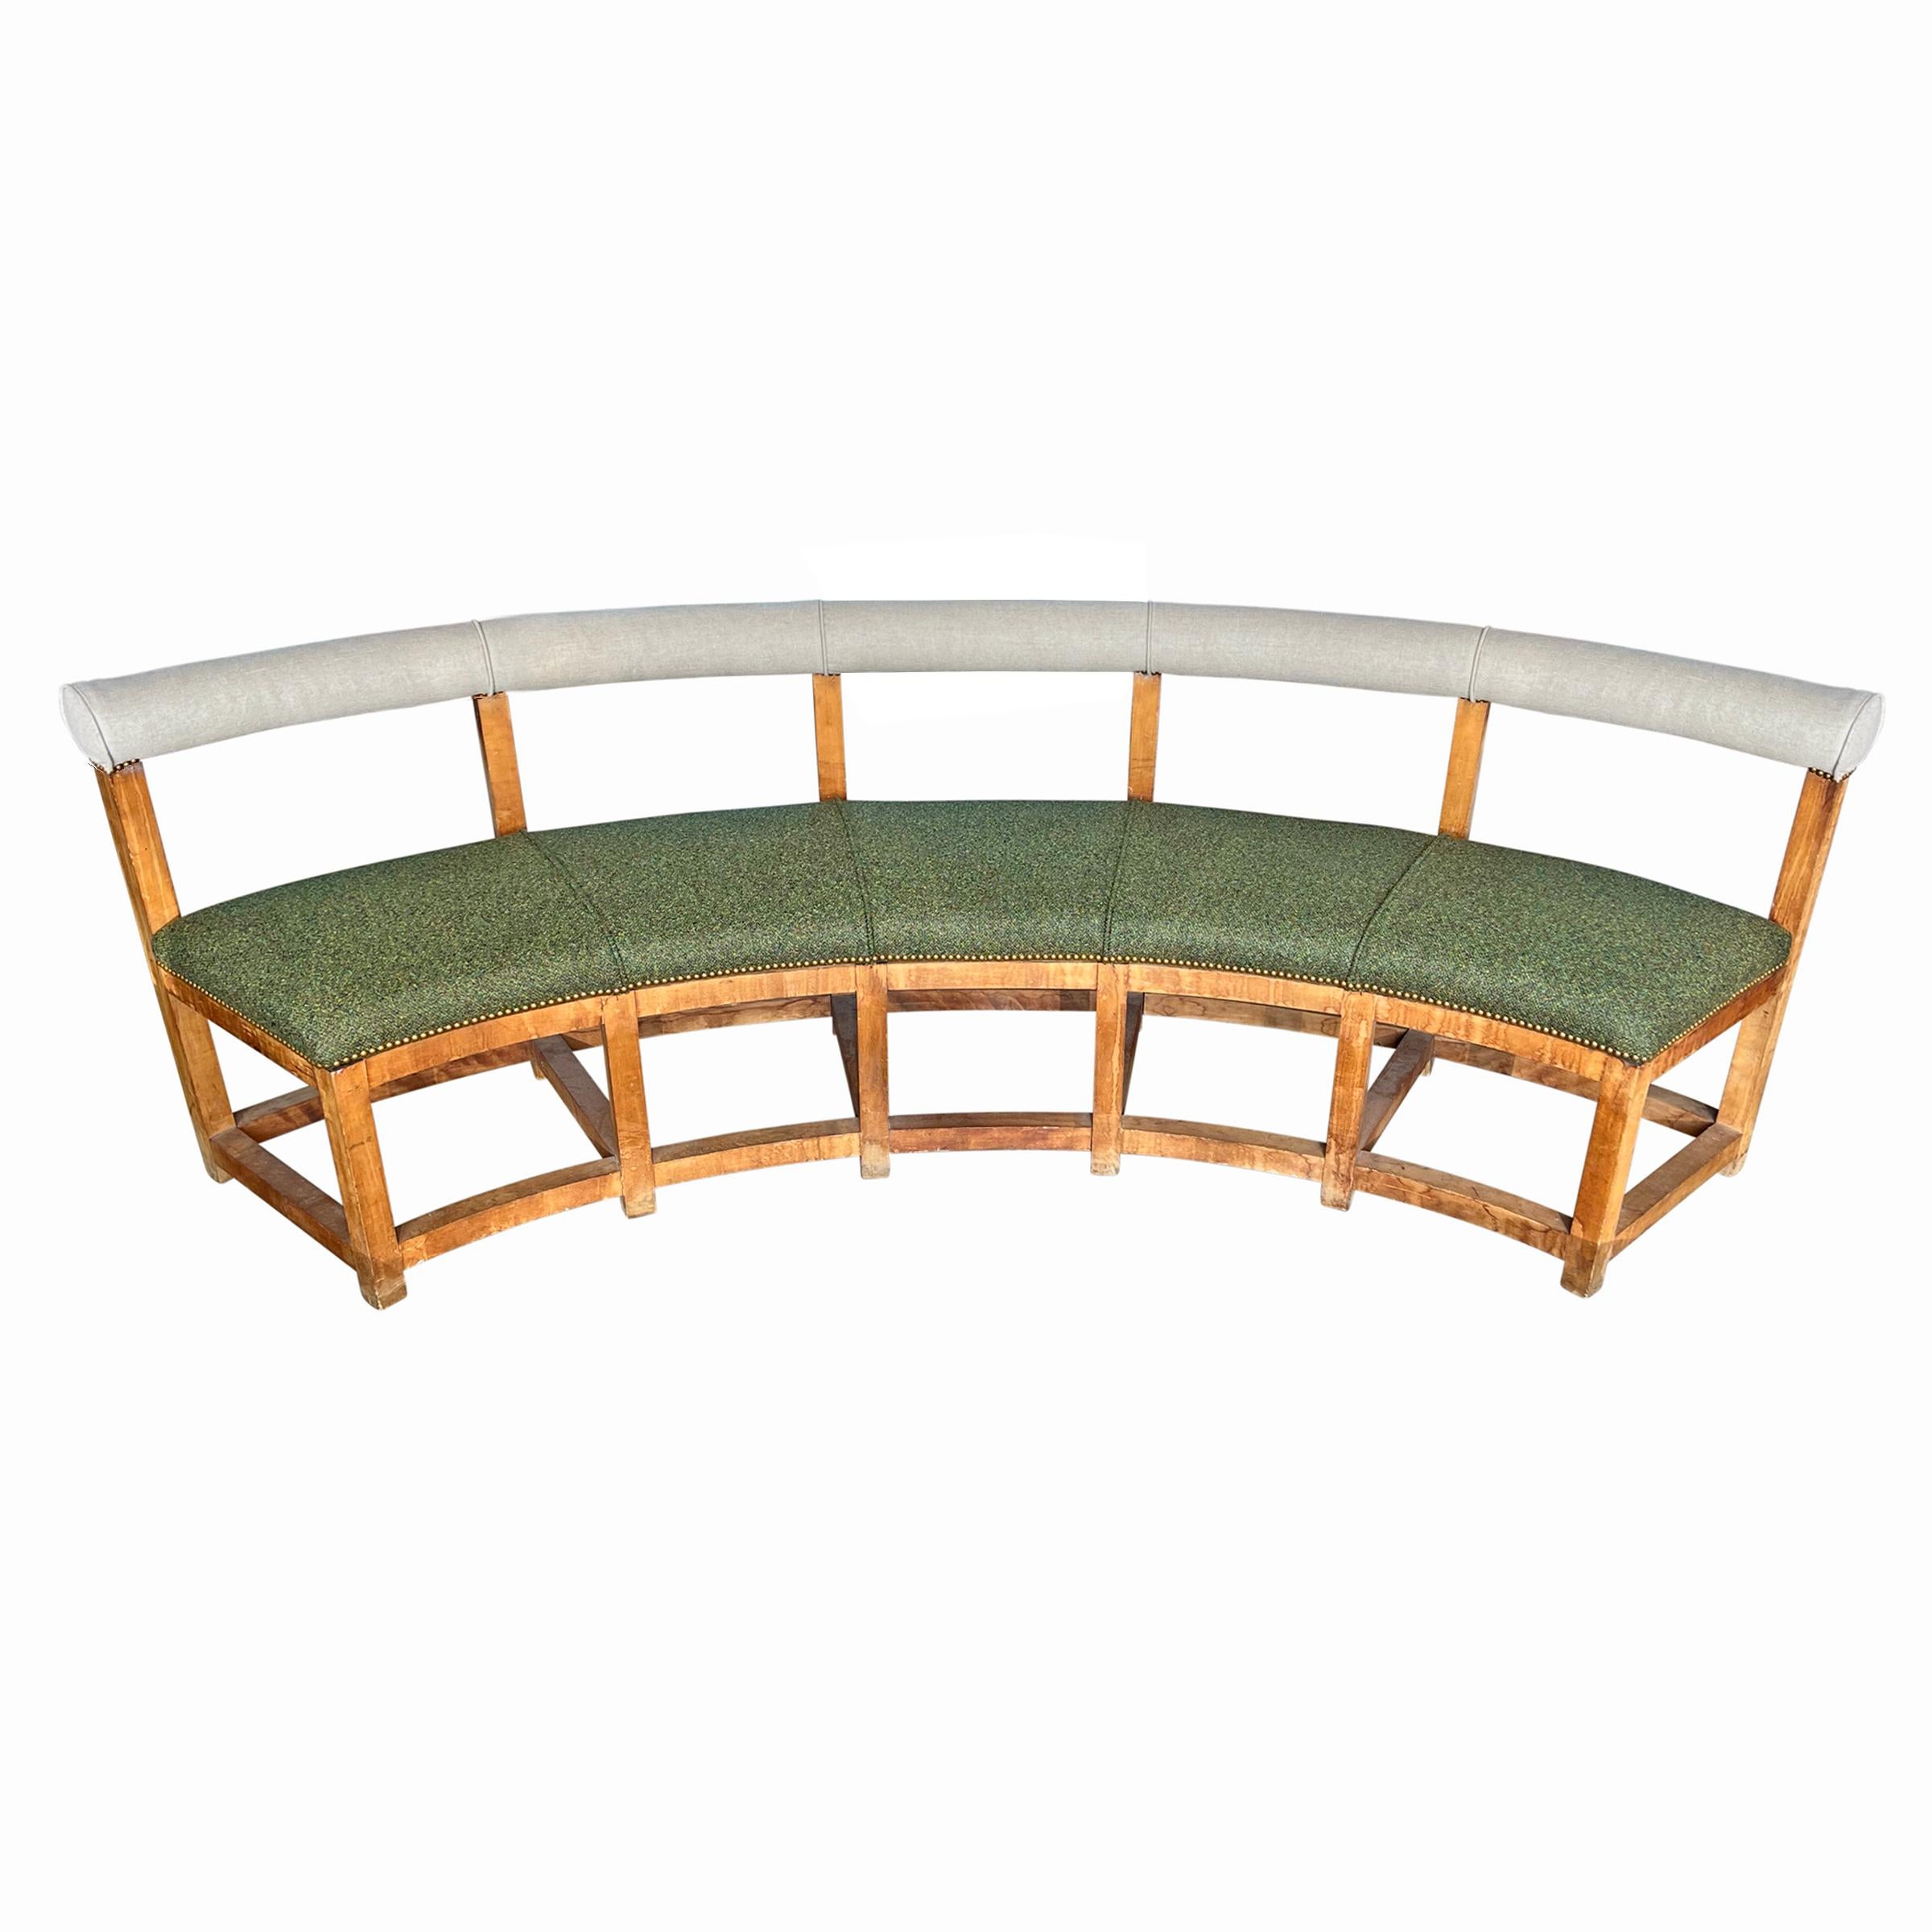 Pair of Sculptural Curved Benches In Good Condition For Sale In Chicago, IL